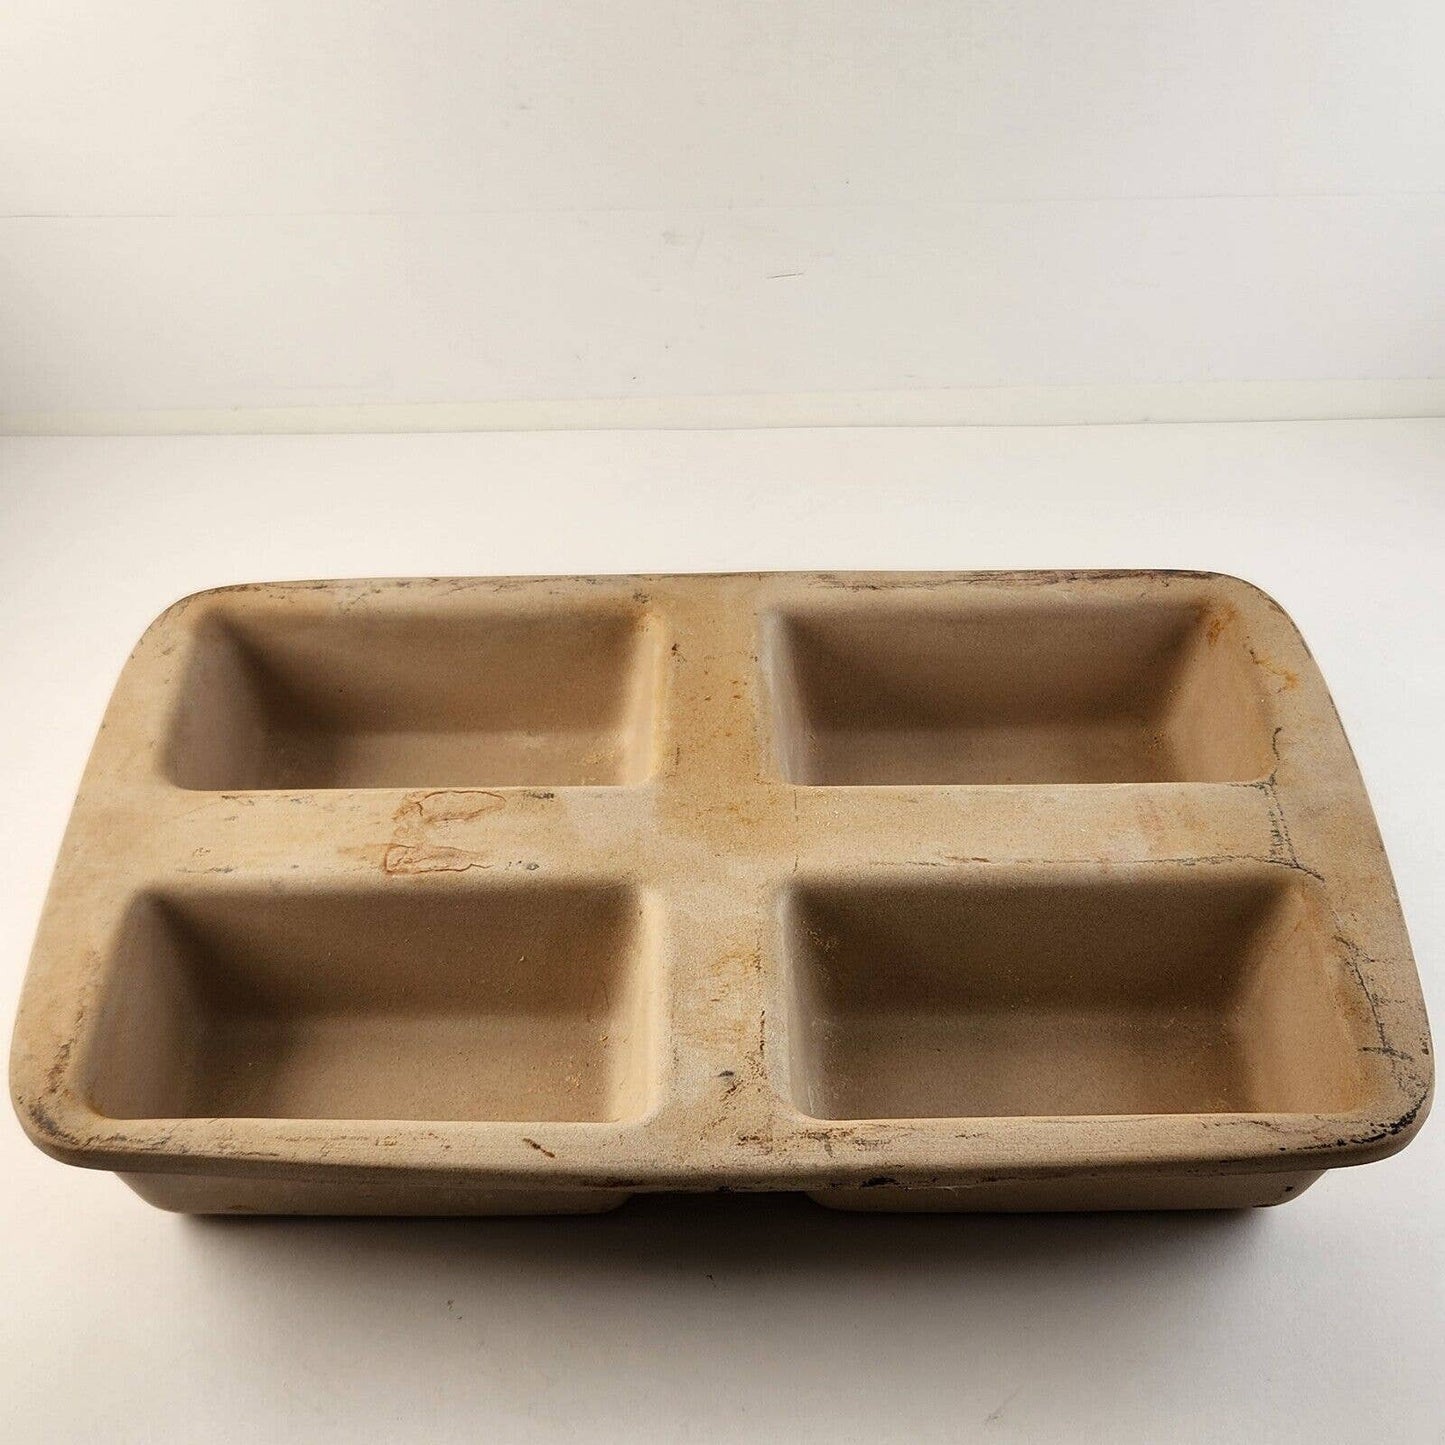 Family Heritage Stoneware Classics Collection pampered chef stoneware mini loaf  pan